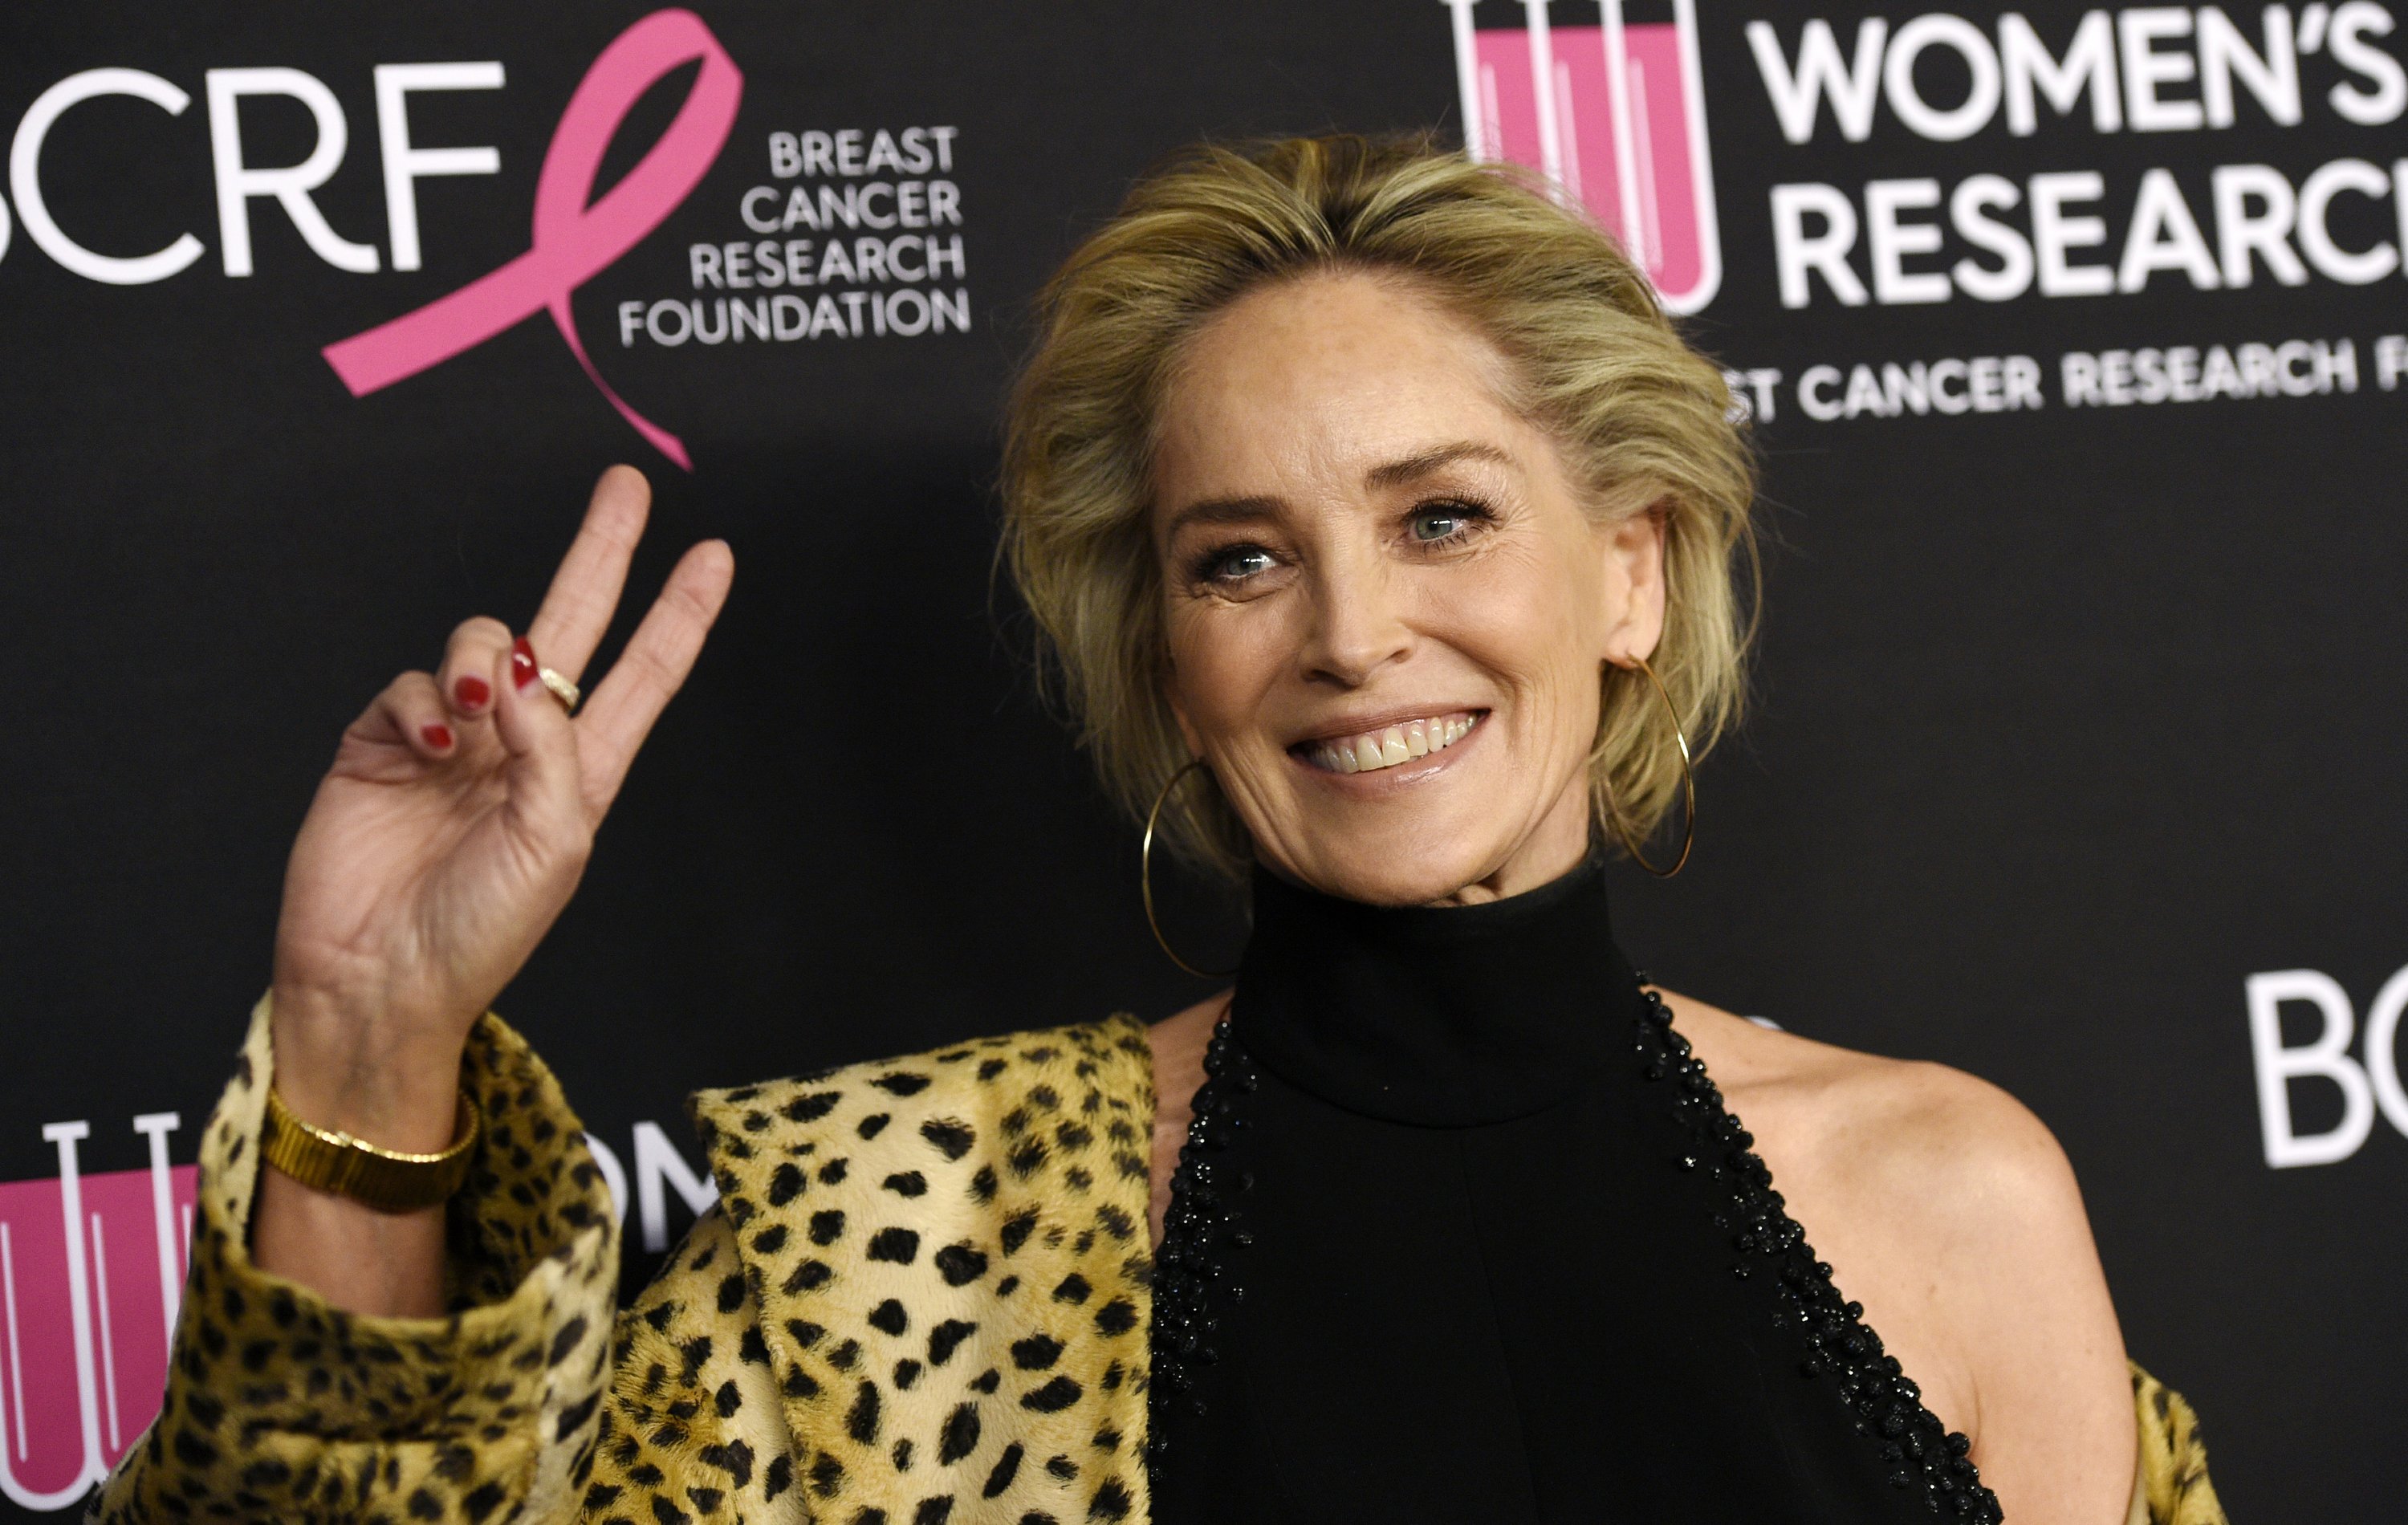 Sharon Stone Shared a Photo from a Hospital Bed